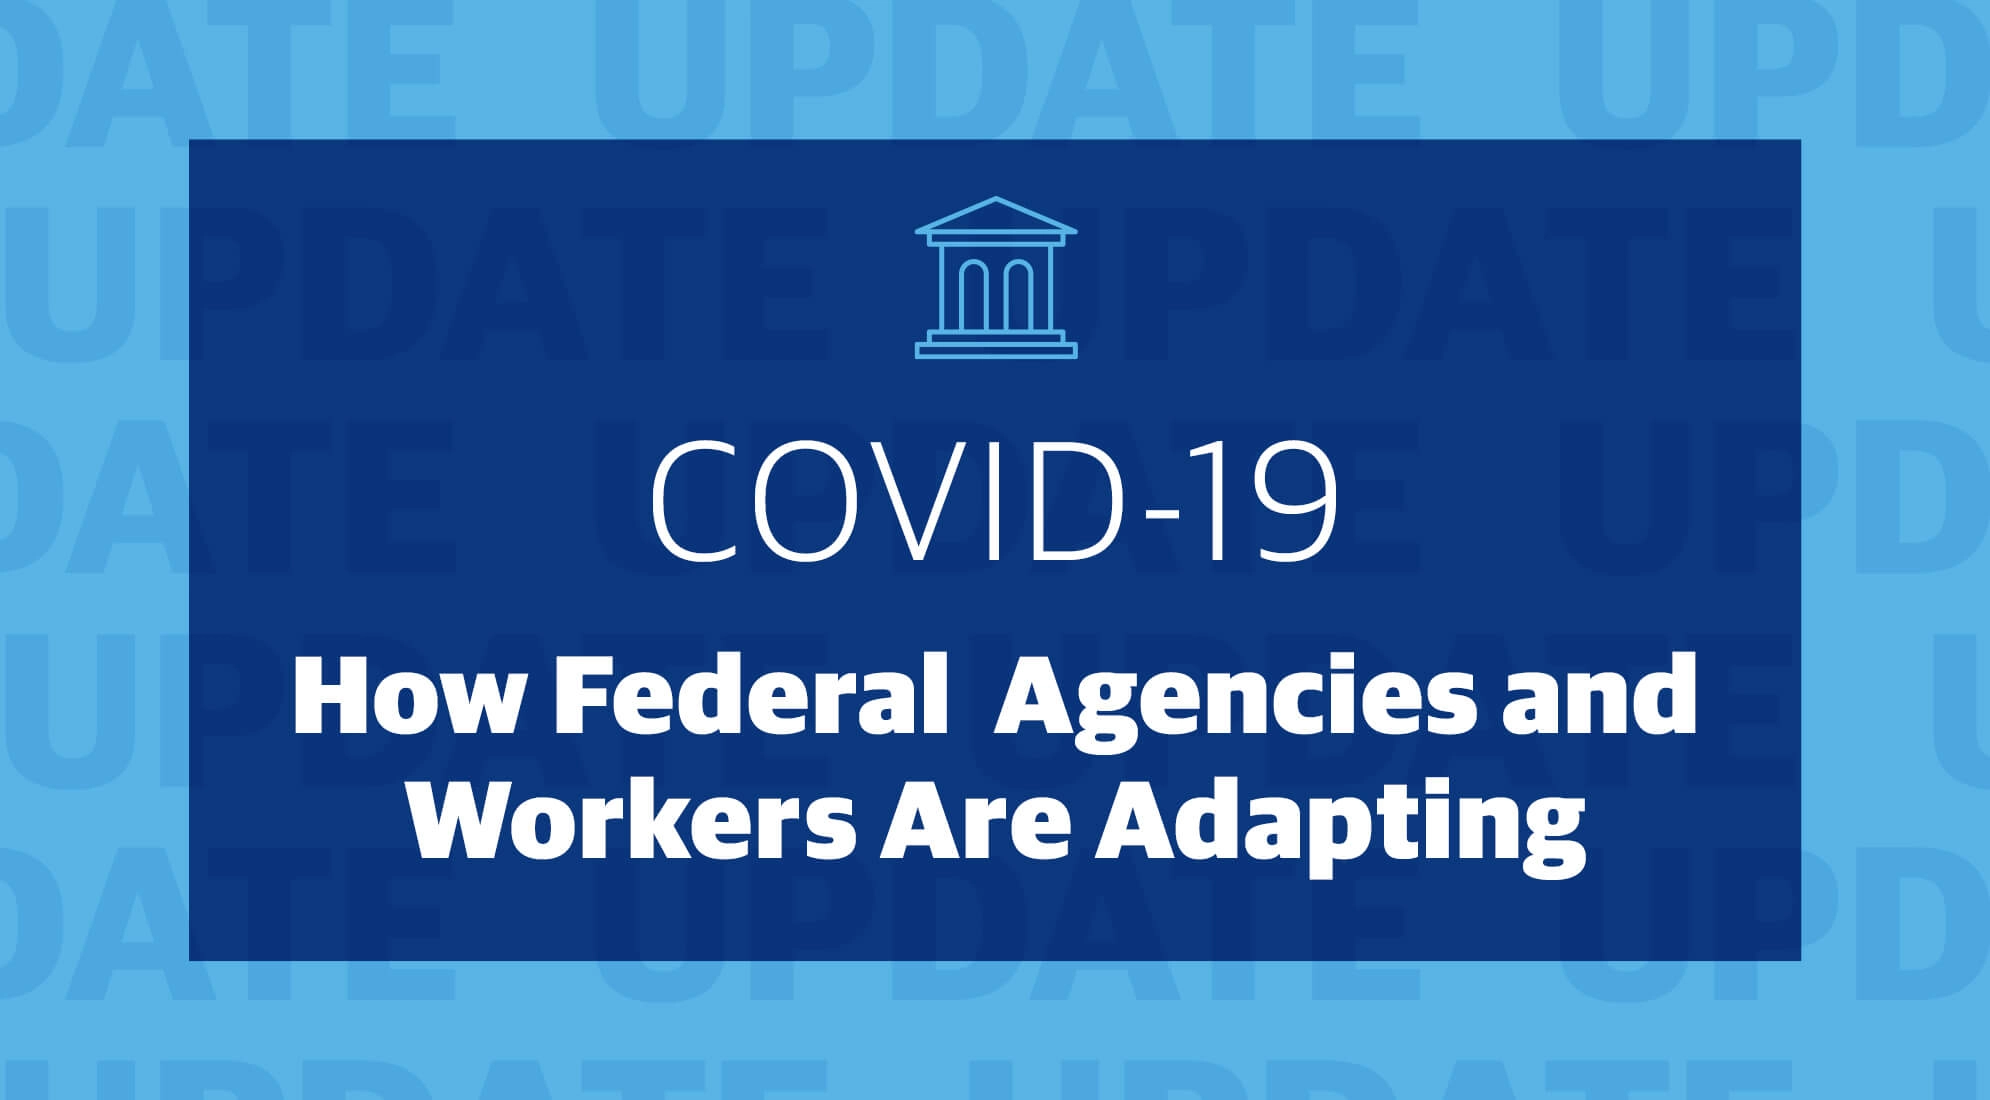 COVID-19: How Federal Agencies and Workers Are Adapting Amid the Crisis